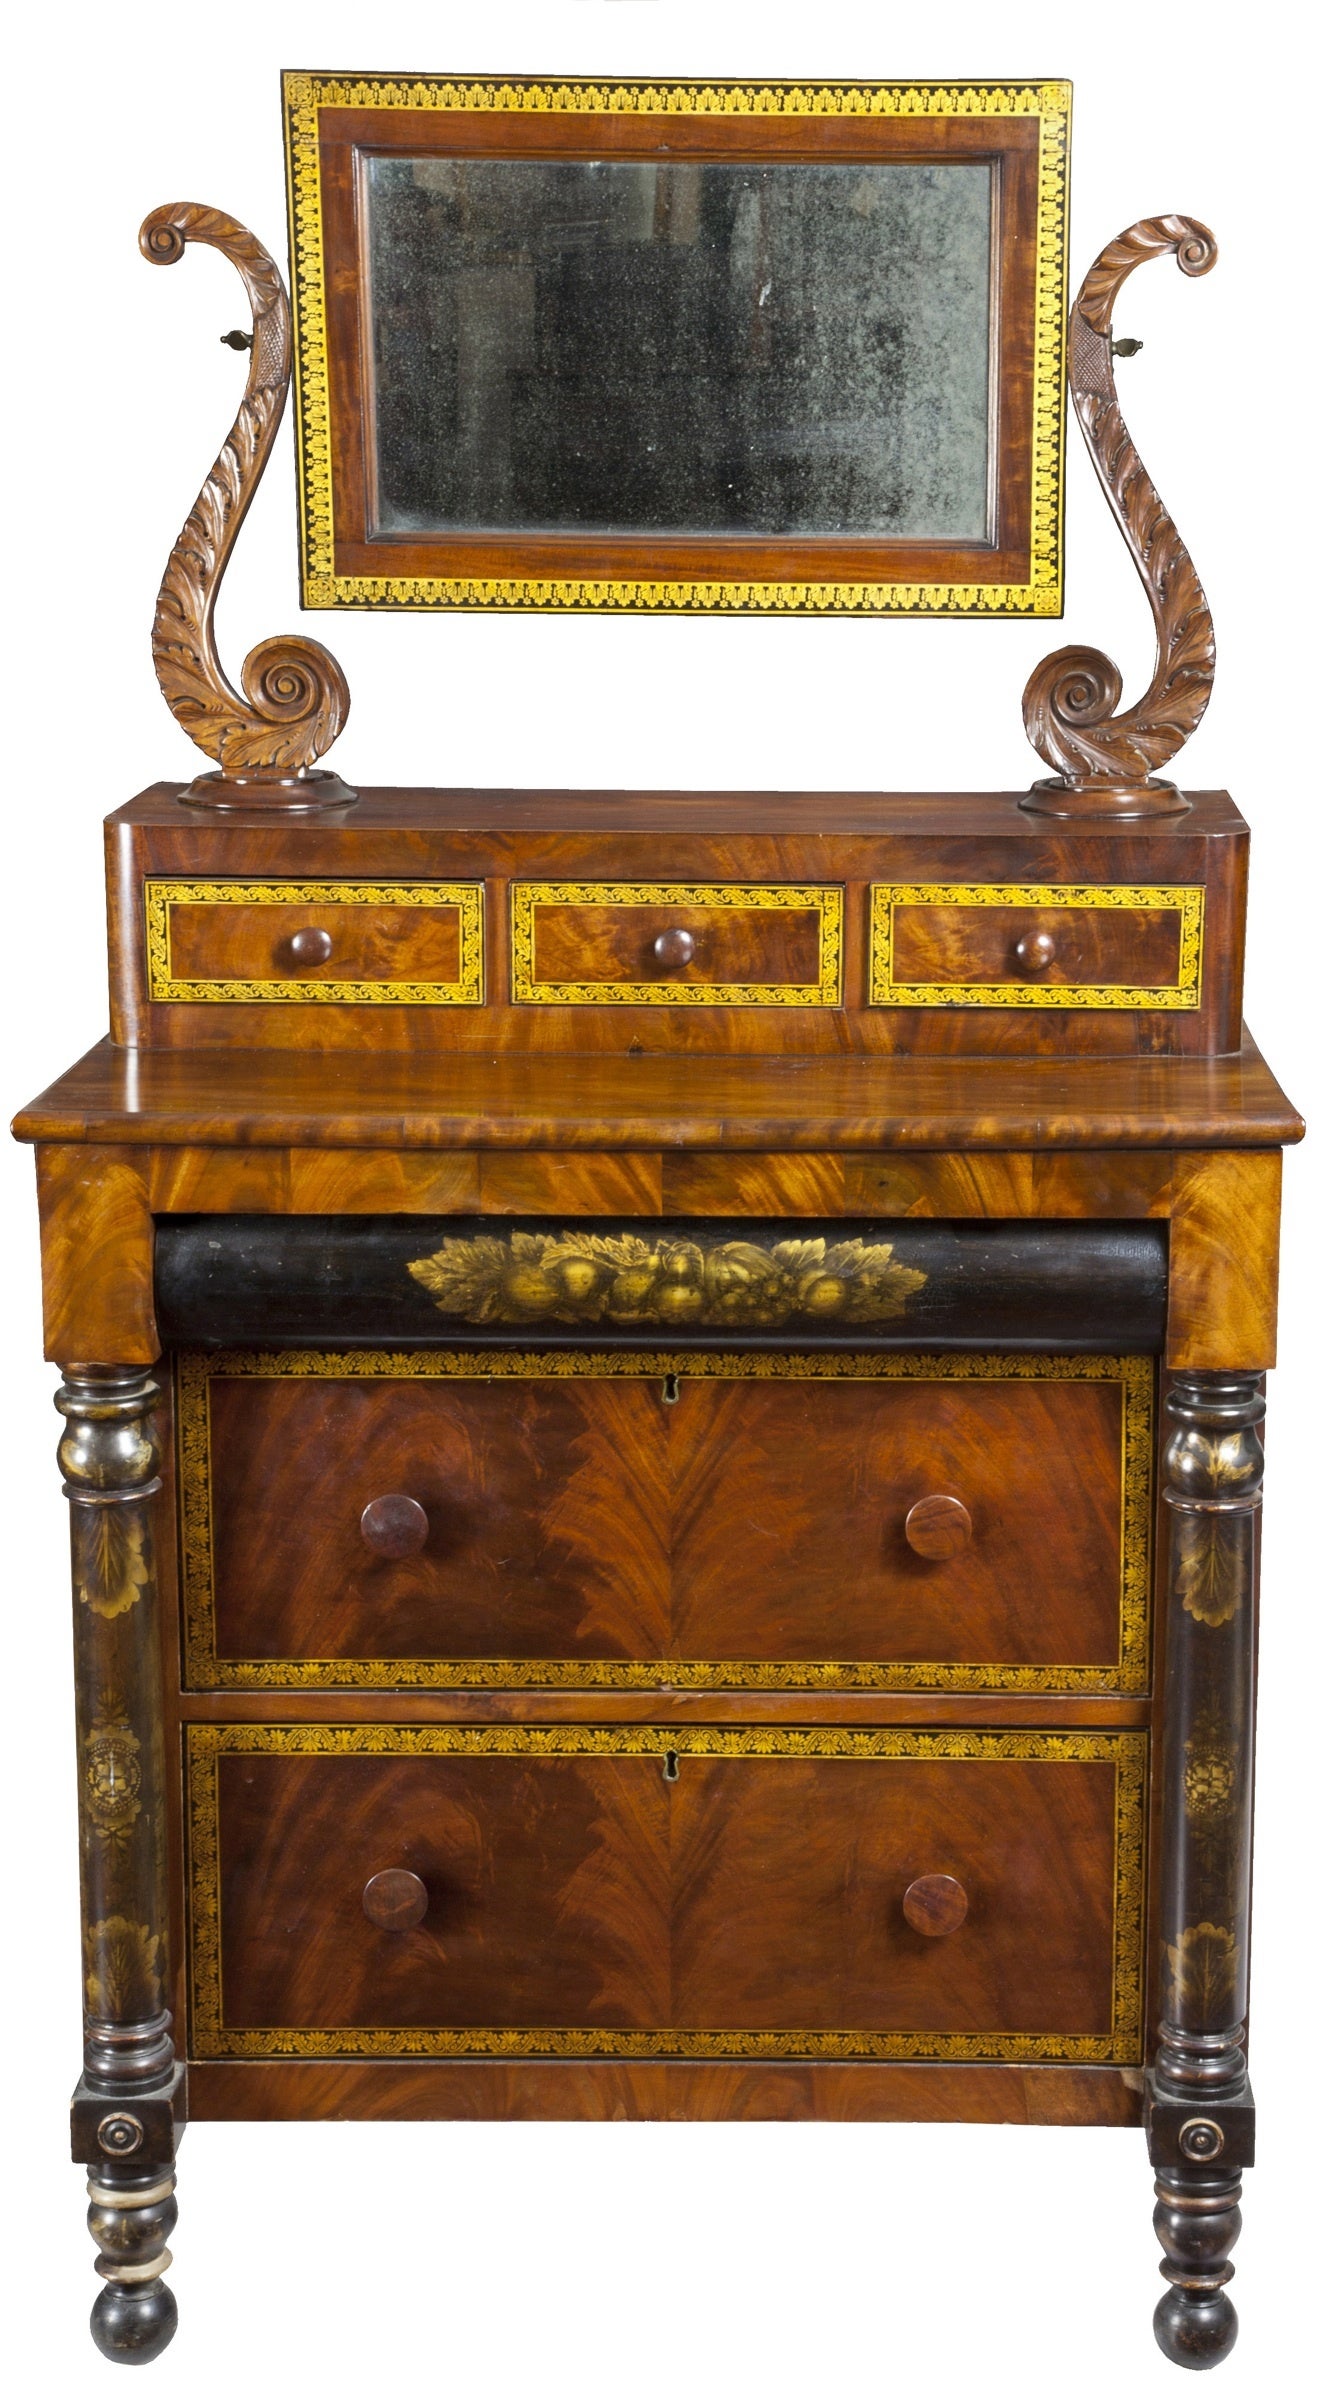 Classical Mahogany Bureau with Gilt Stenciling Attributed to Haines and Holmes